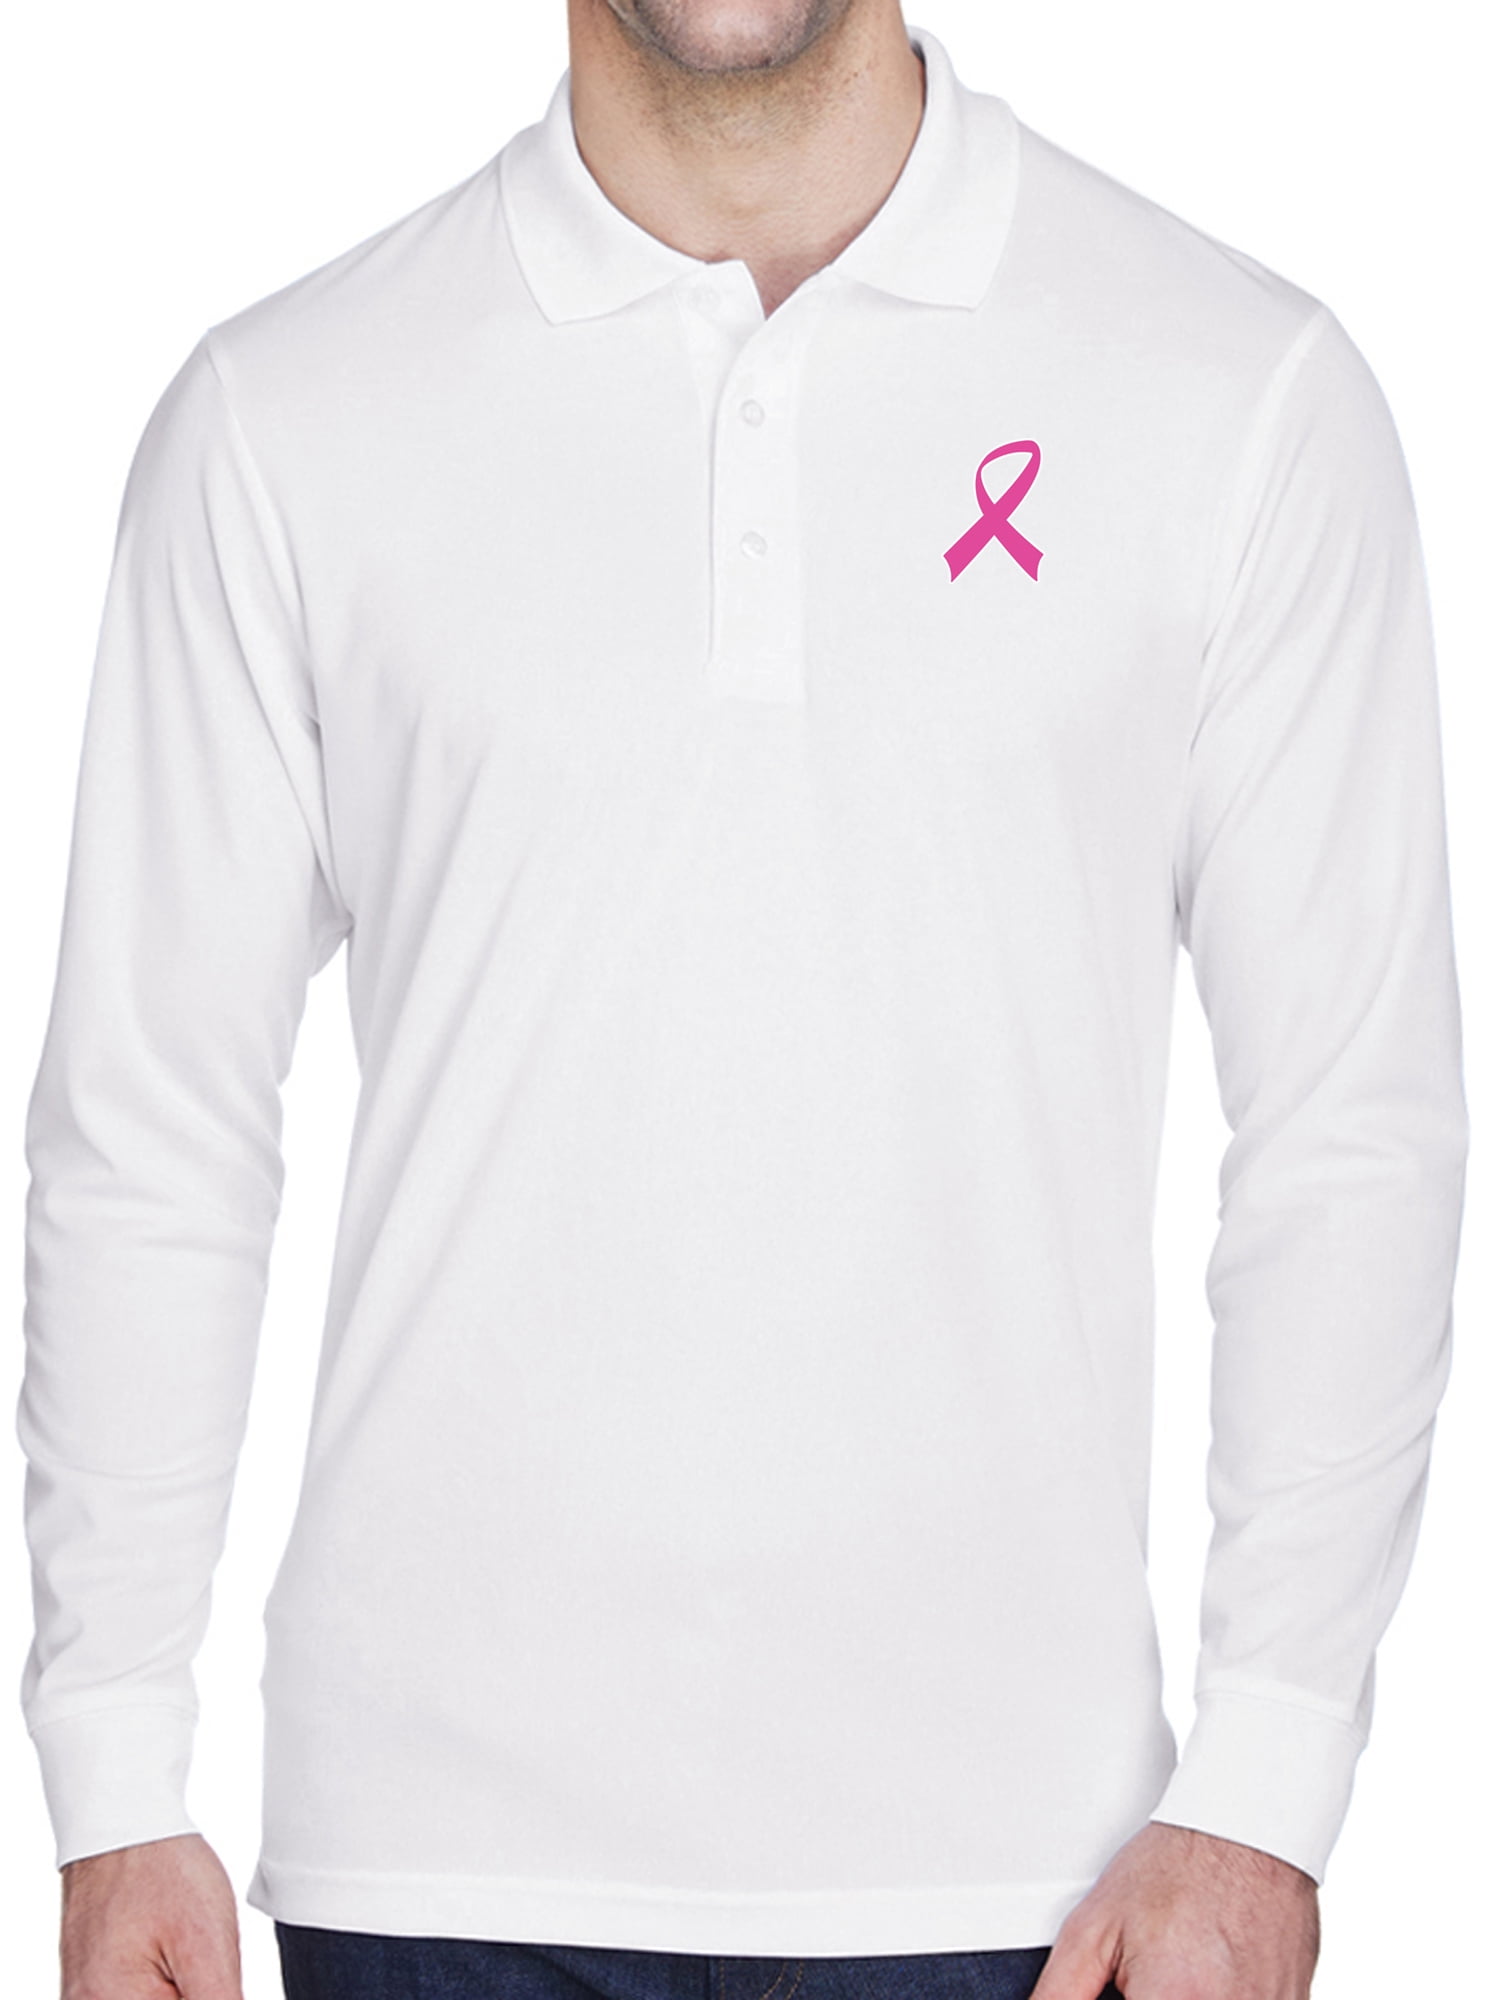 Breast Cancer Tri Blend Wicking Polo Pink Ribbon Pocket Print